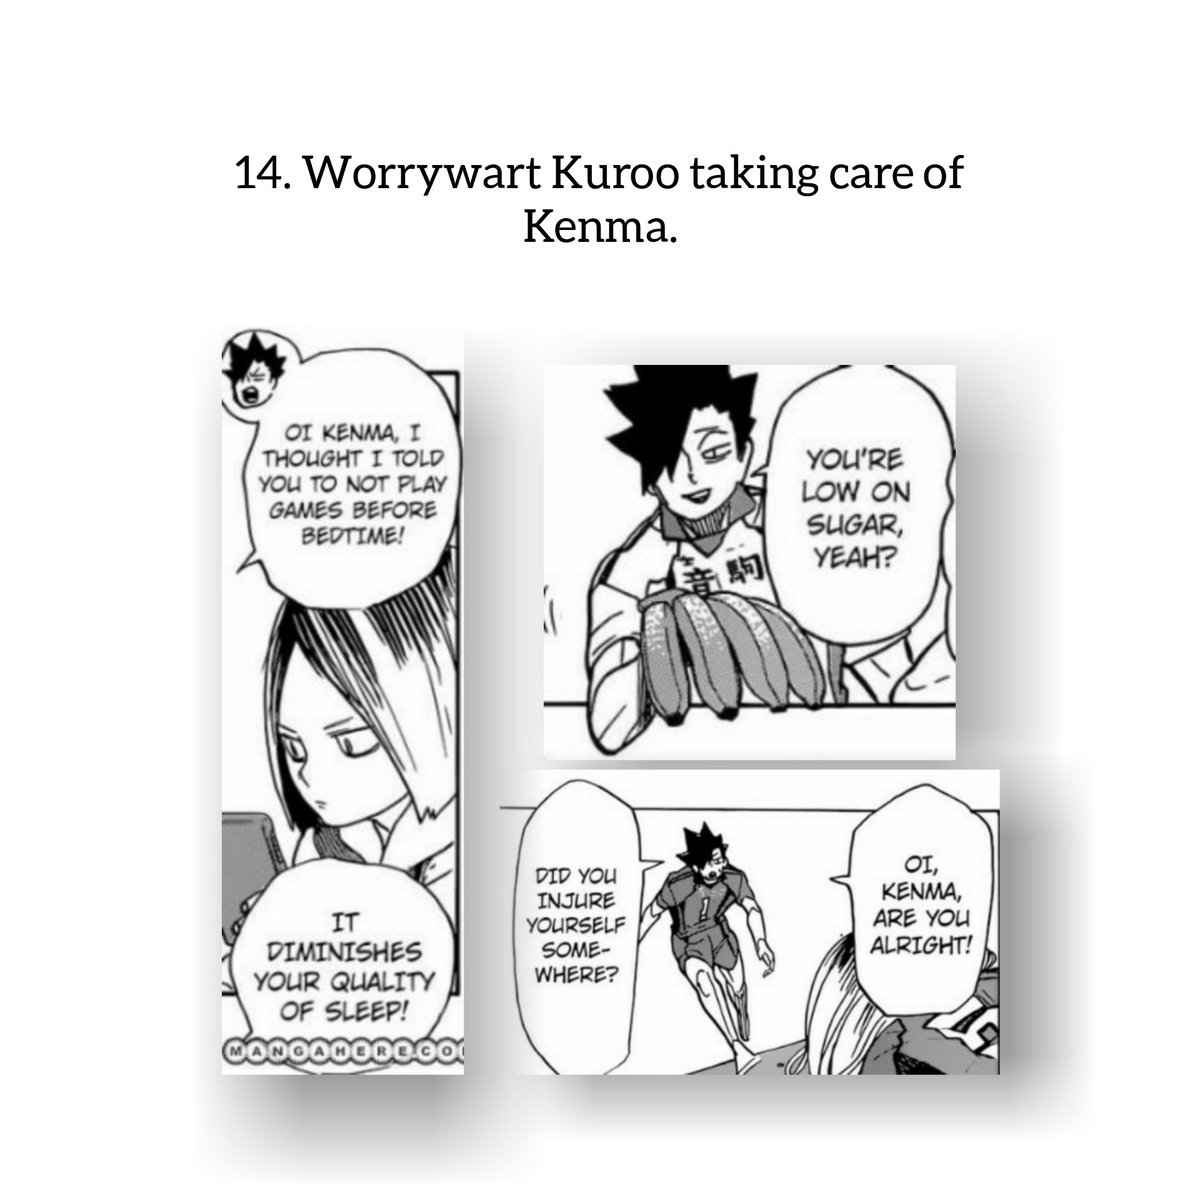 Putting this together bc it's all about Kuroo just looking out for Kenma. 